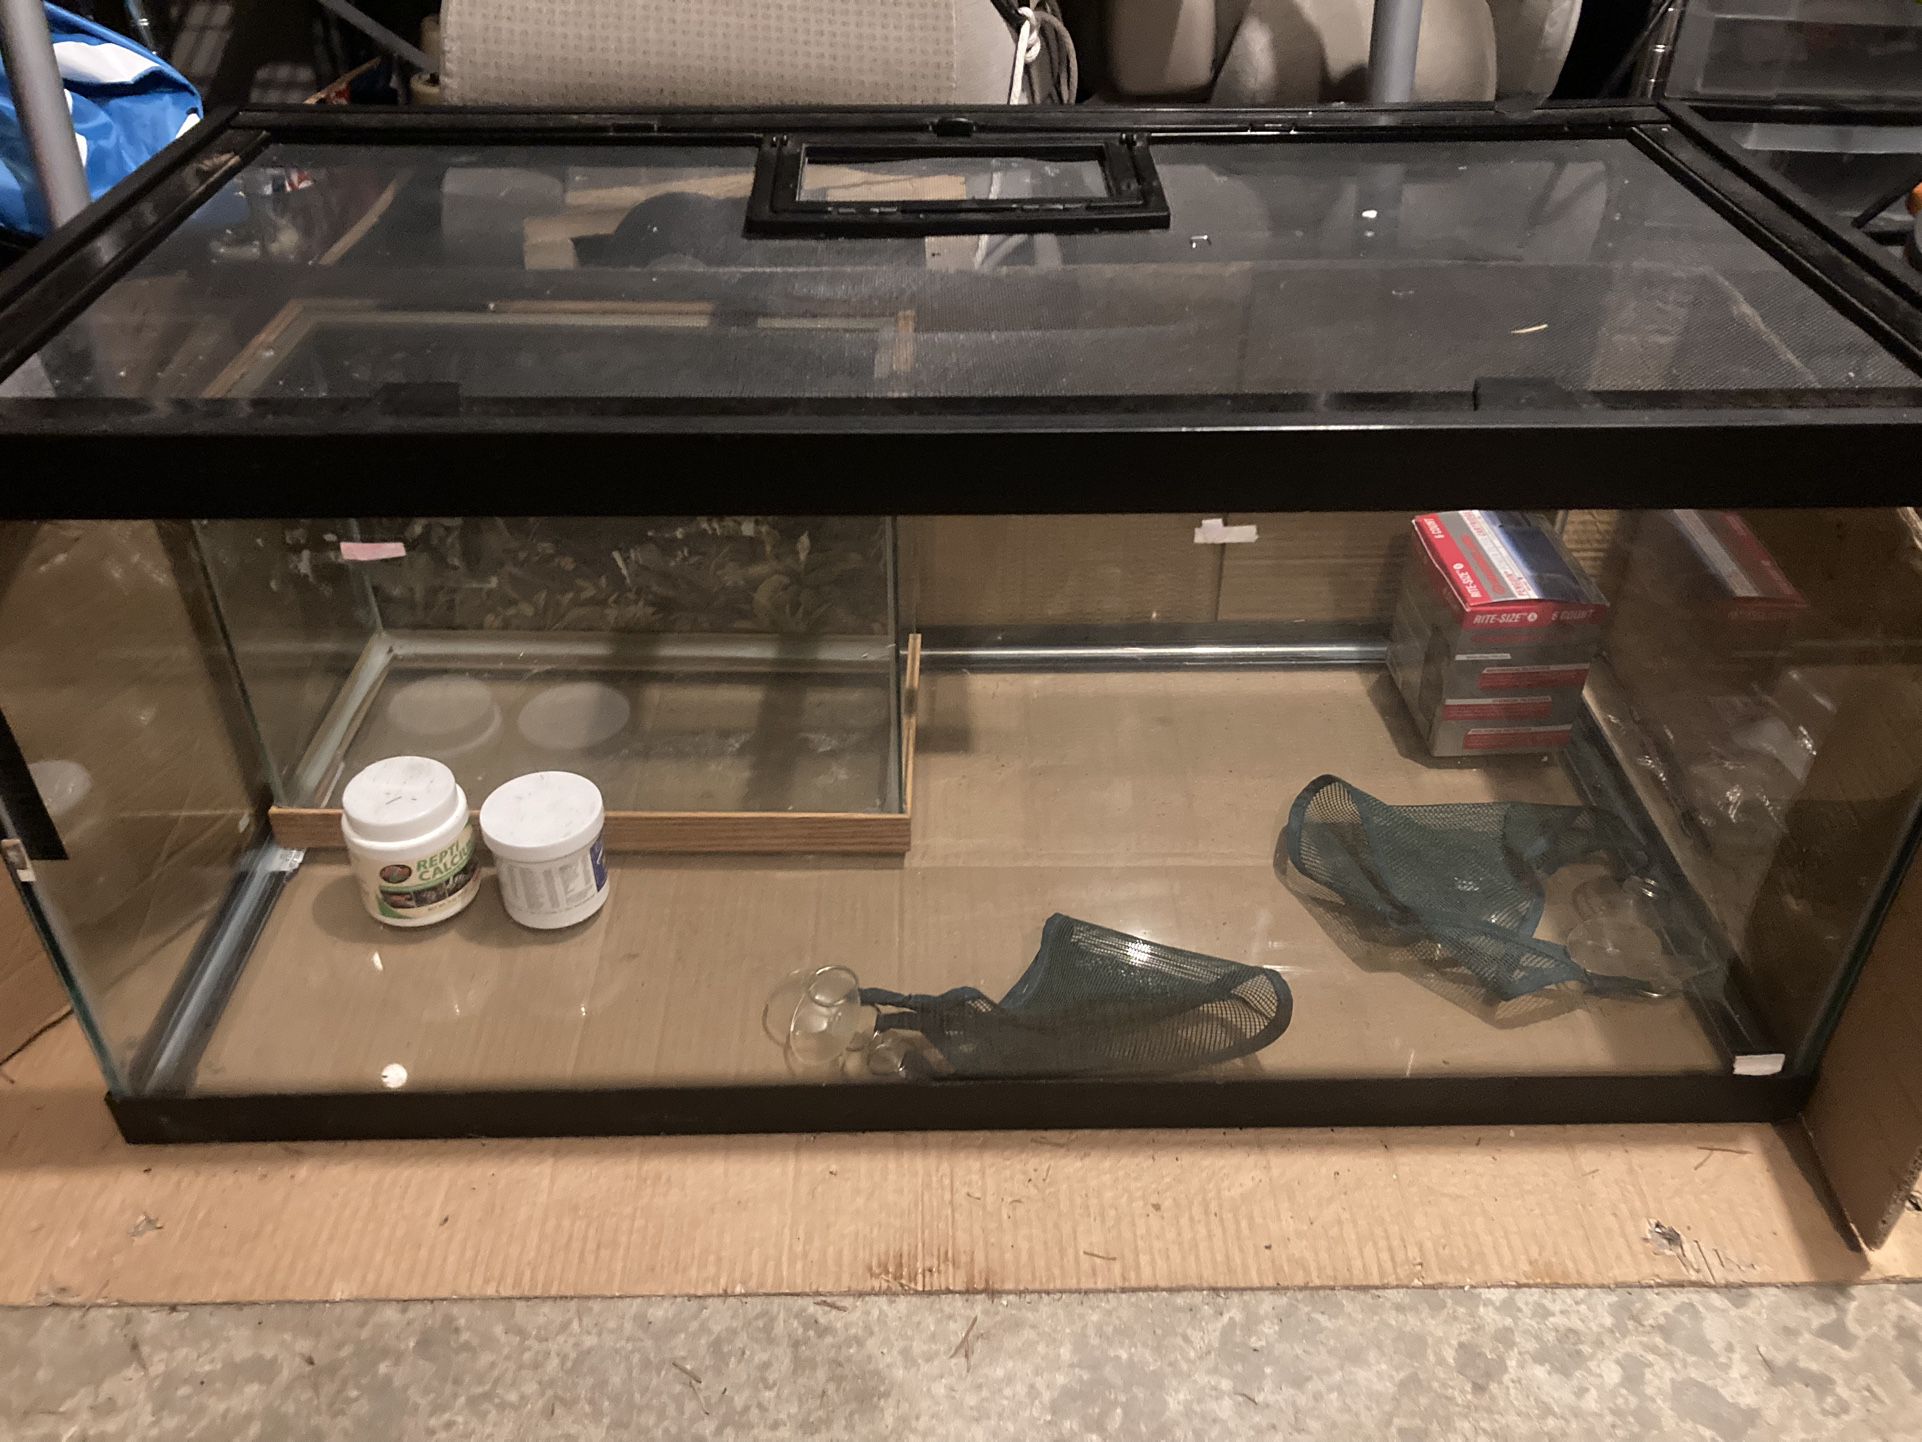 Reptile Tank+accessories+tank For Live Food(crickets, Etc), 10 Gal Fish Tank And Accesories (hablo Español)